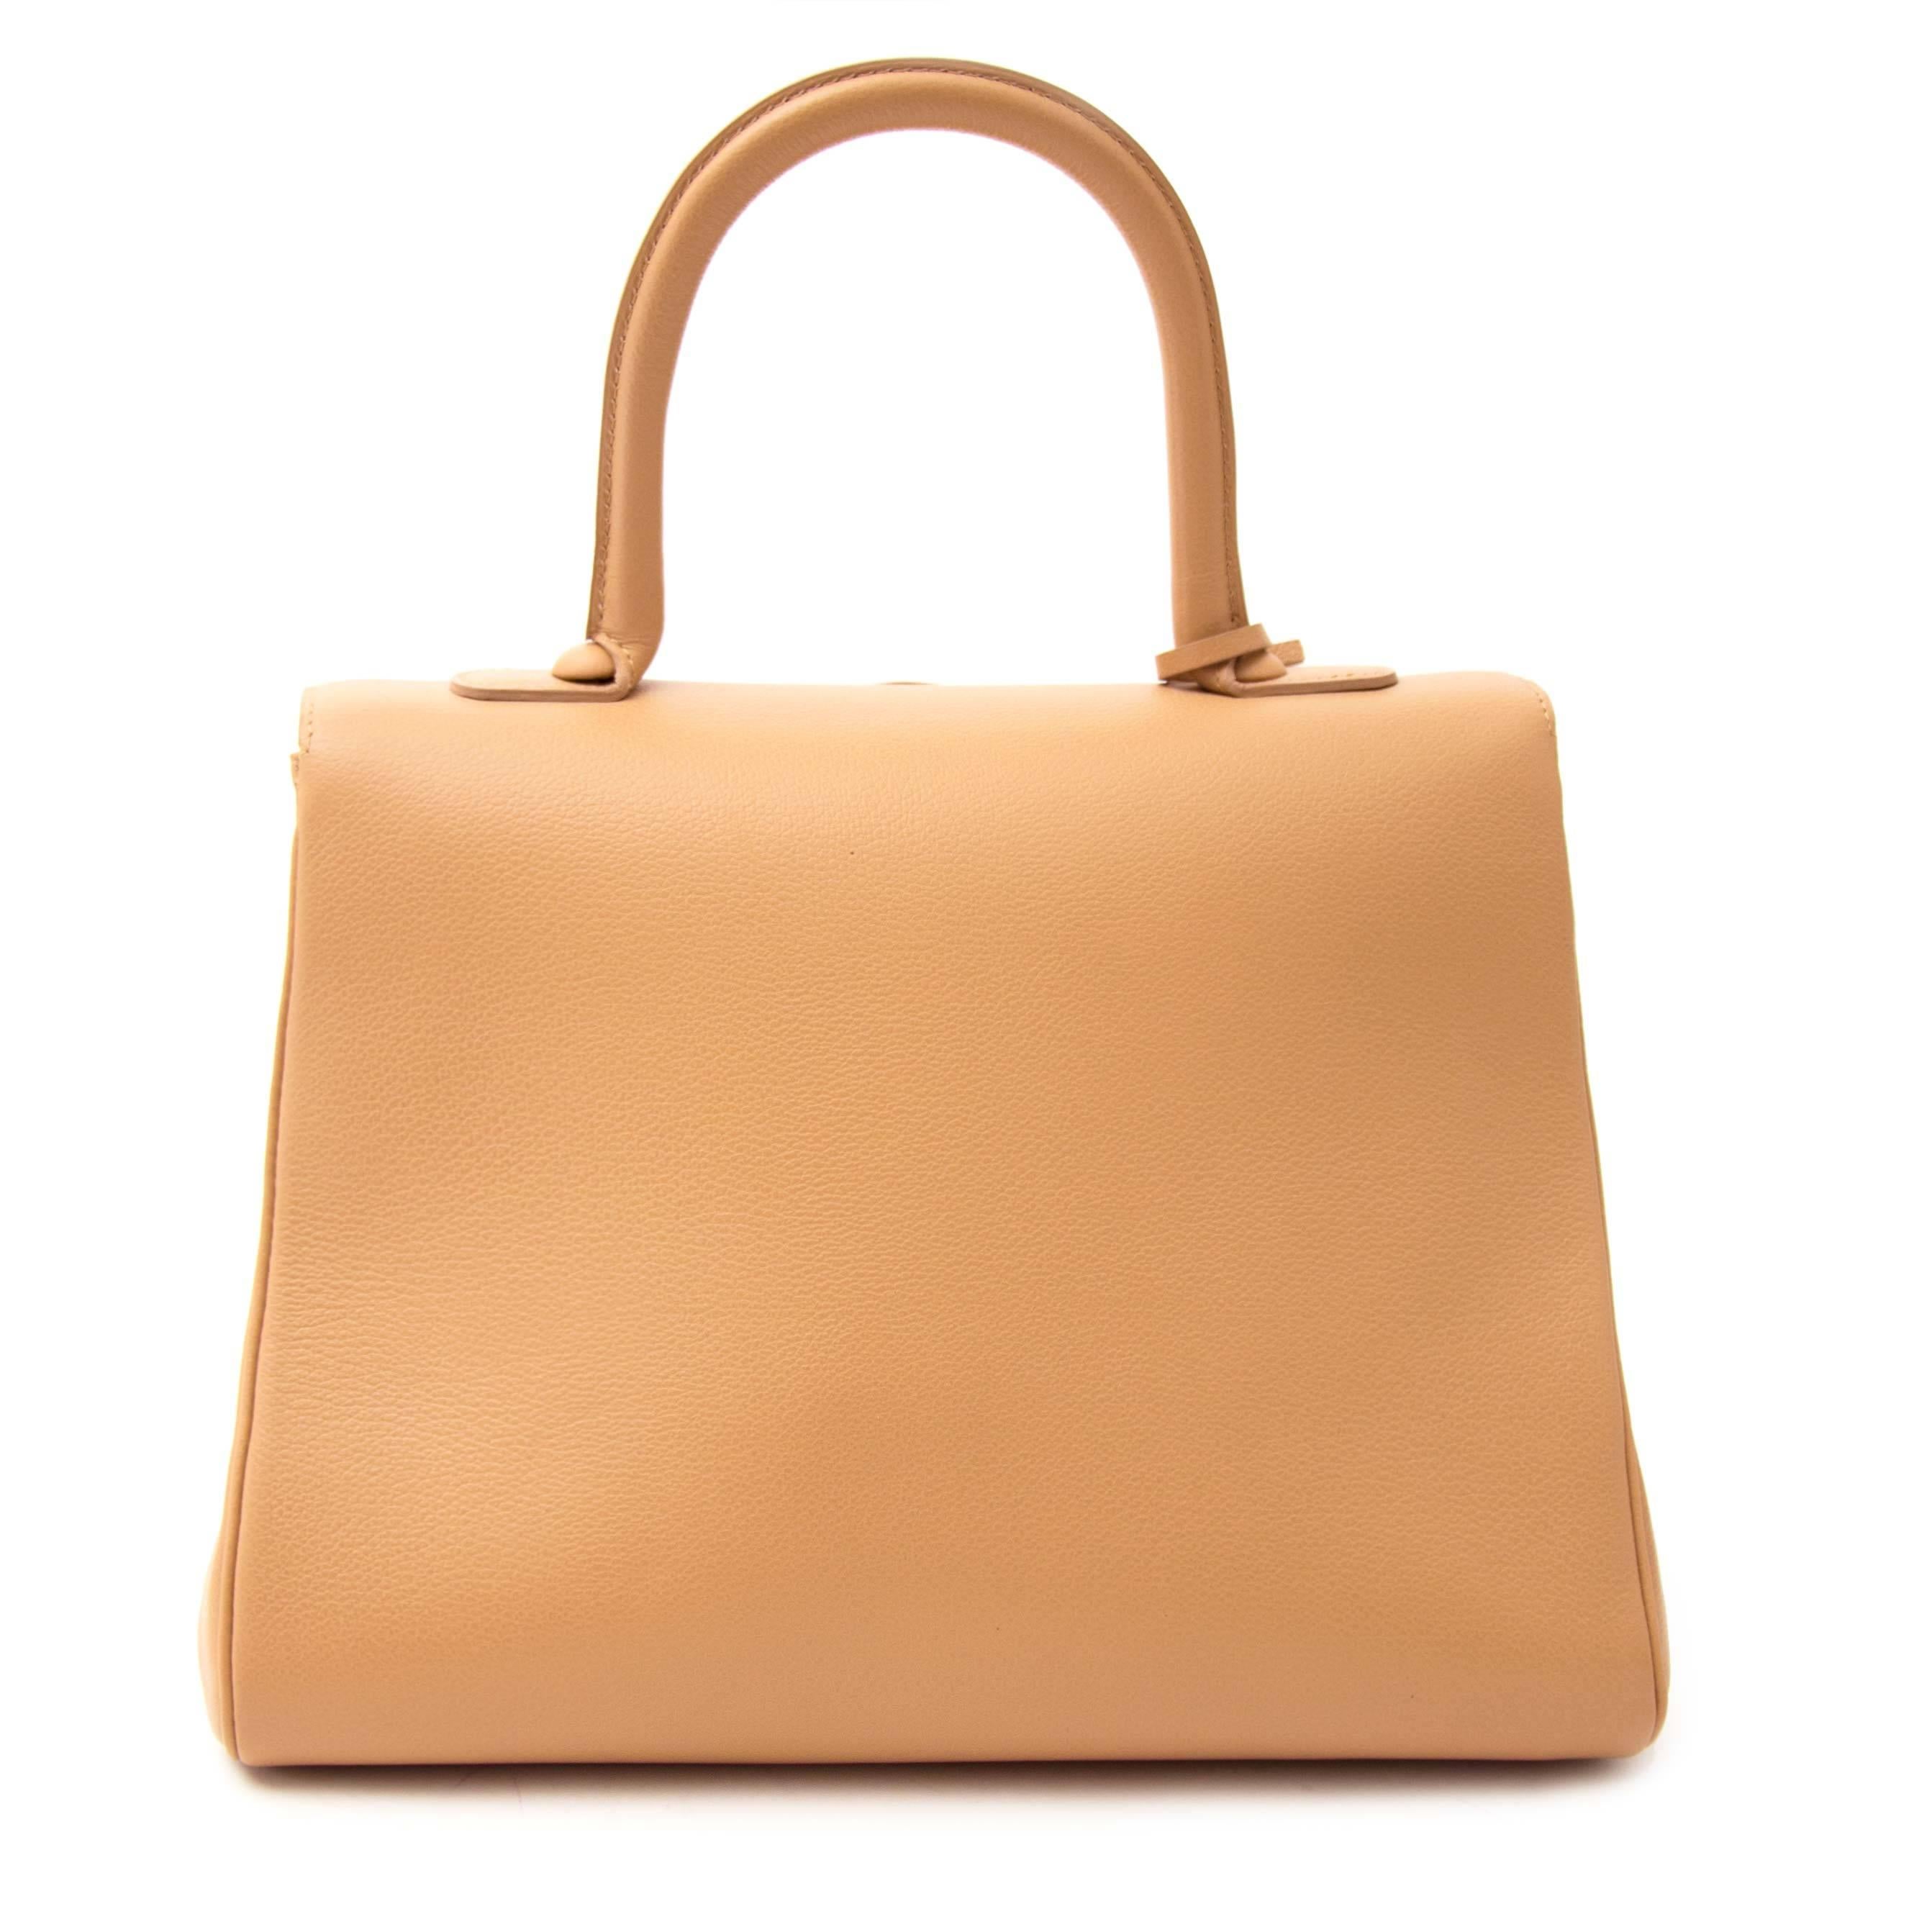 This beautiful Delvaux Brillant is the perfect day to night bag.
The Sand color makes it easy to combine.
The bag opens with the iconic matt gold 'D' buckle and has one large compartment, with a side pocket and zipper pocket.

It is a timeless